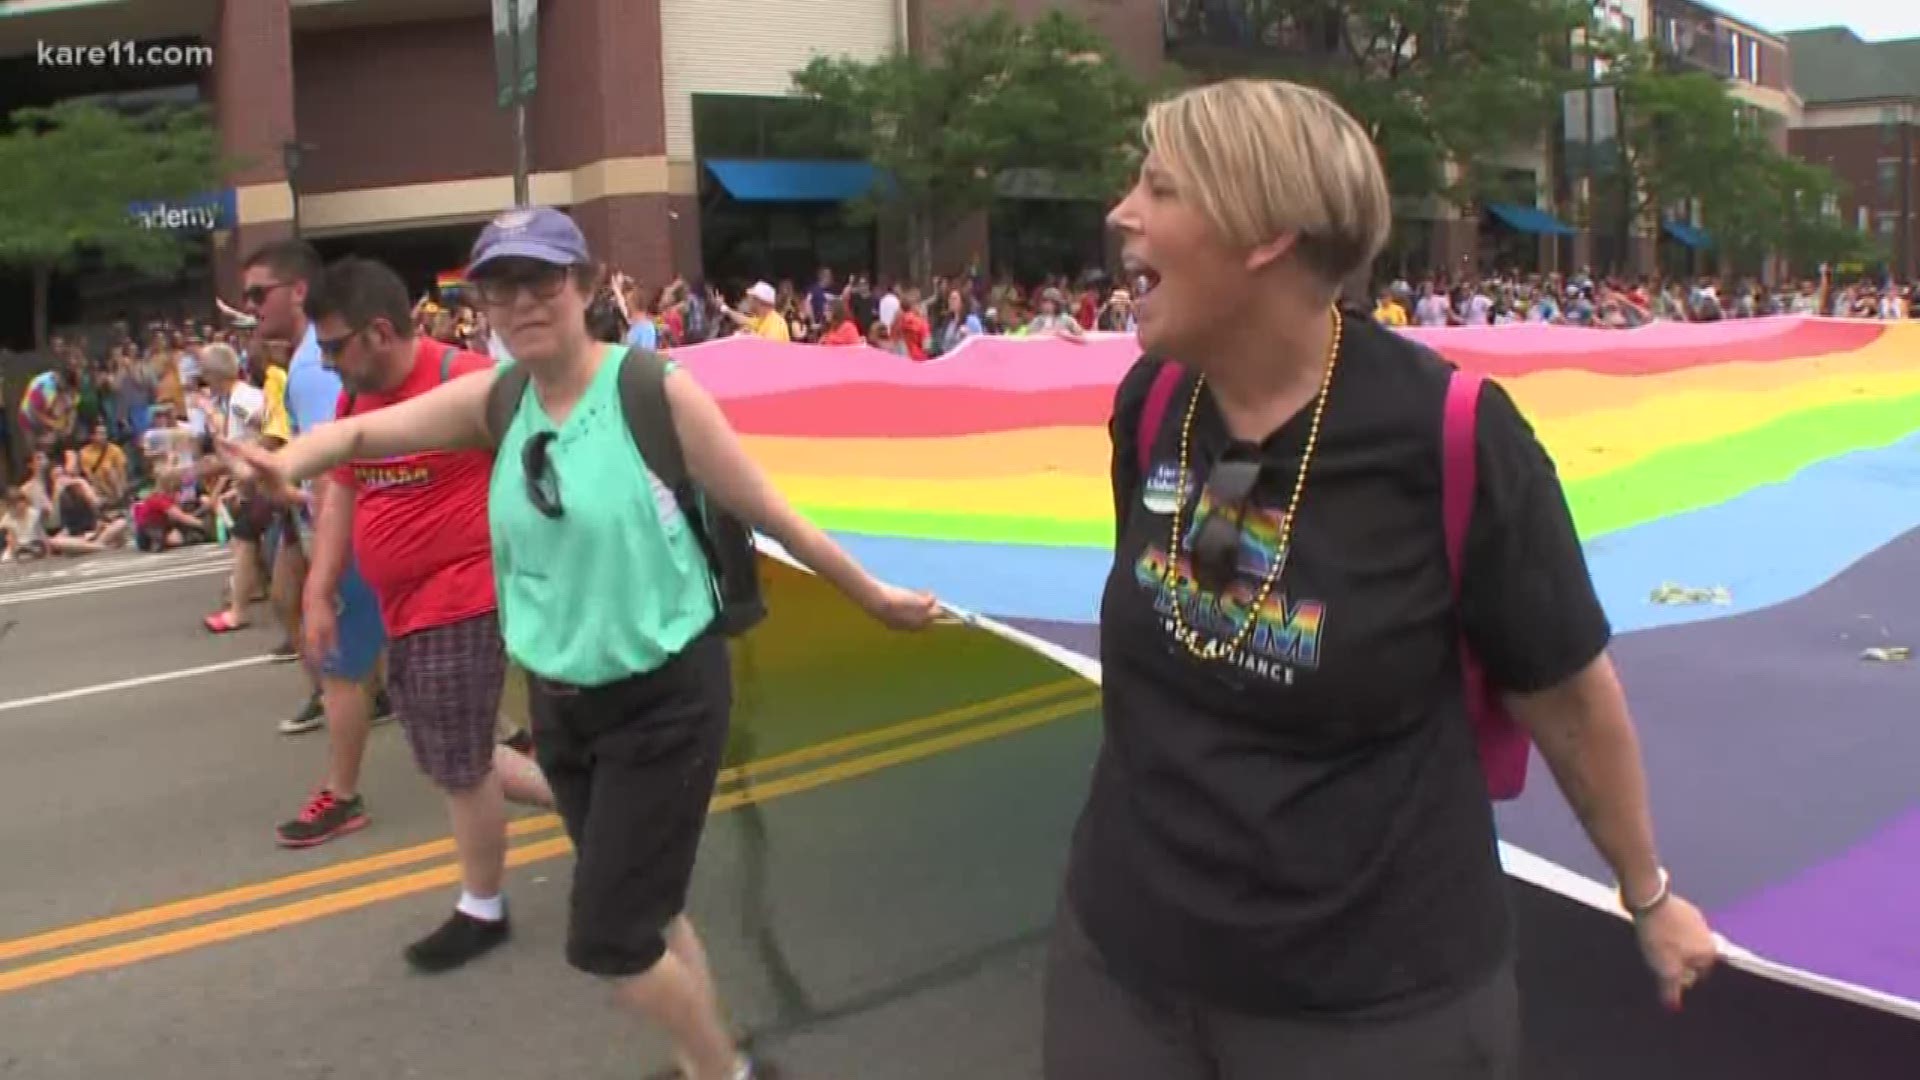 The Pride Parade went on as protesters took to the streets after a fatal police shooting in Minneapolis. https://kare11.tv/2KiG3n7